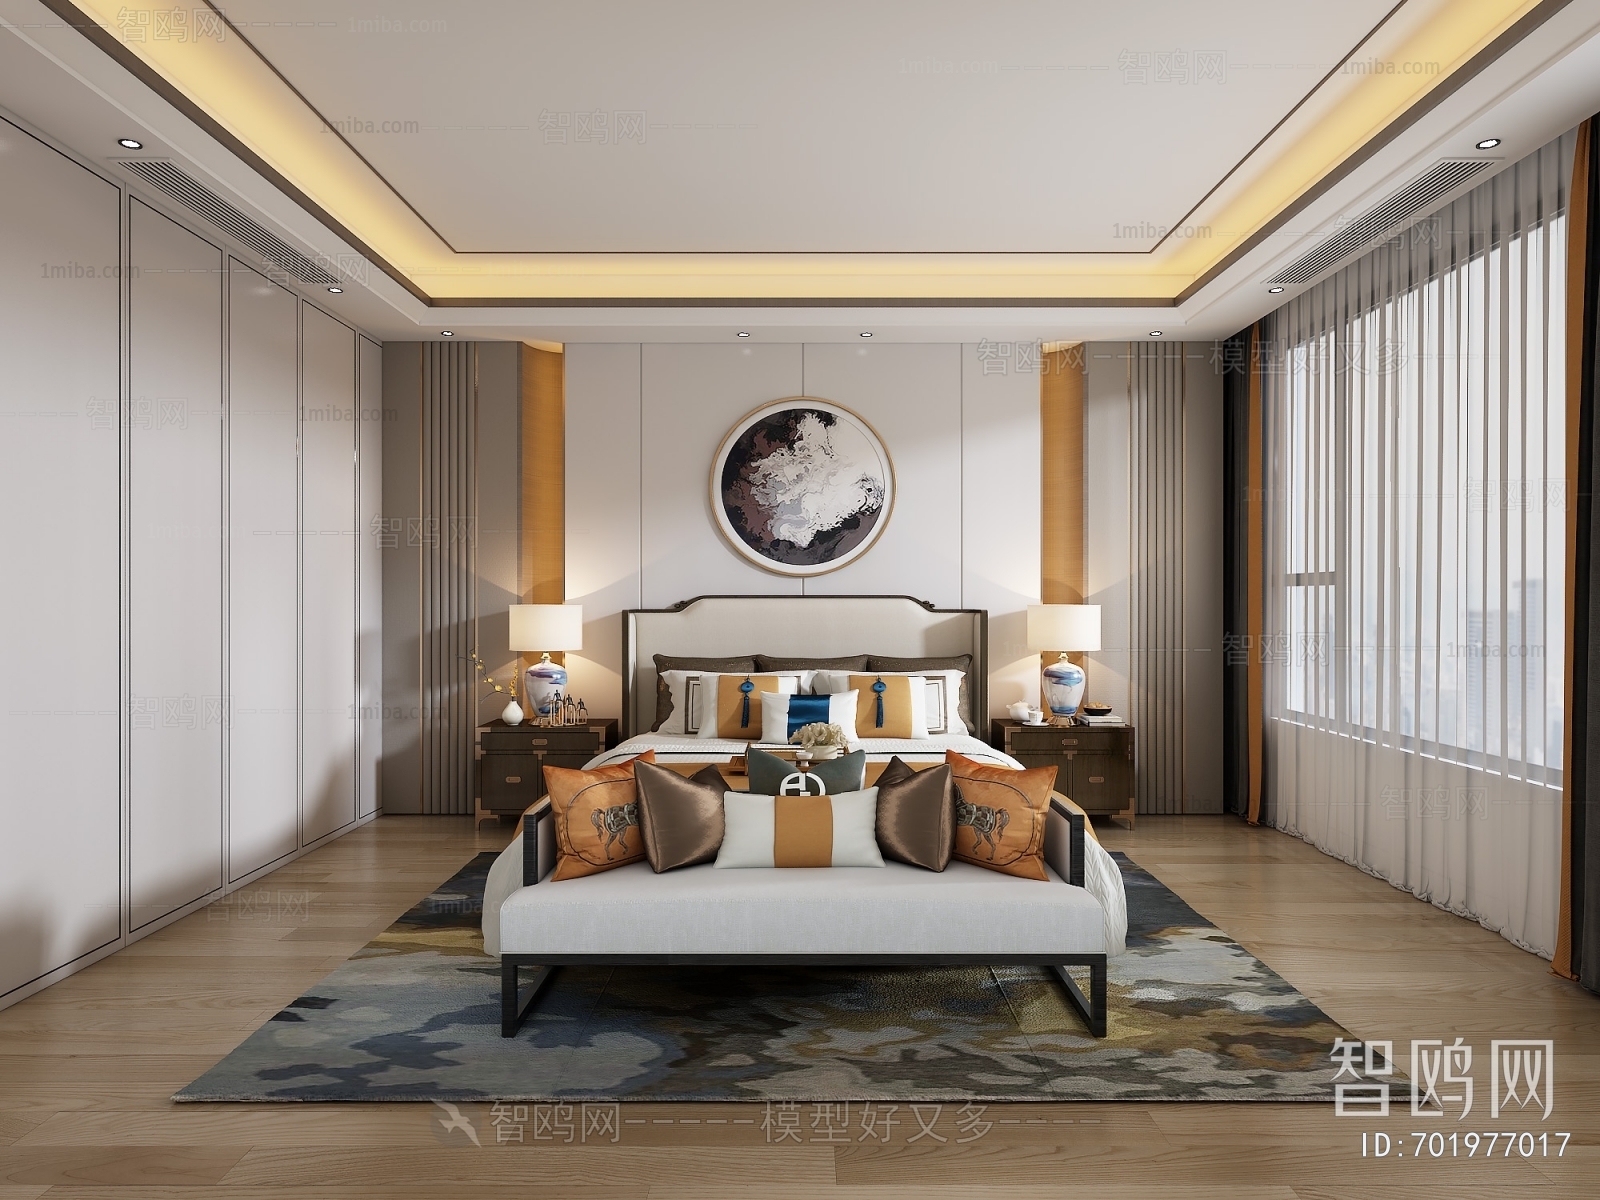 New Chinese Style Bedroom